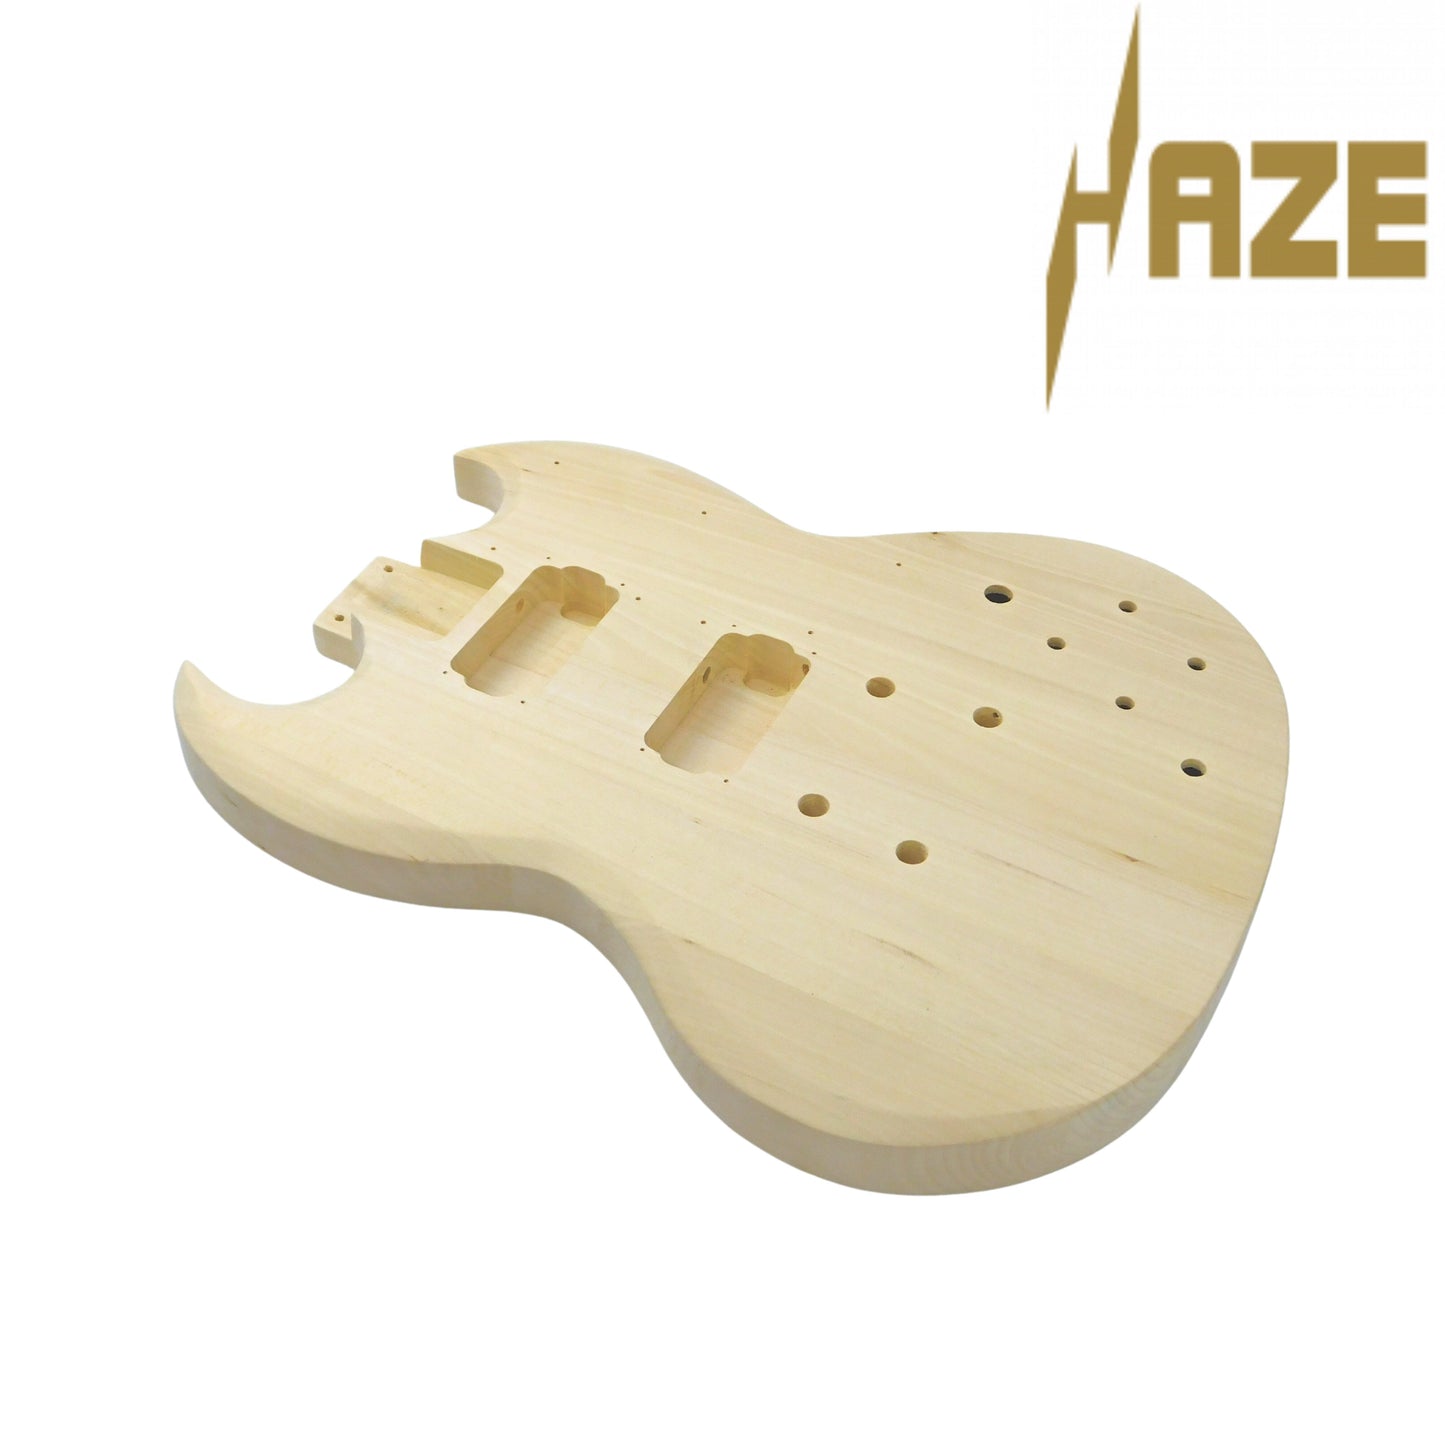 Haze Electric Guitar DIY, Solid Basswood body and Maple neck, No-Soldering, HSSG19200DIY